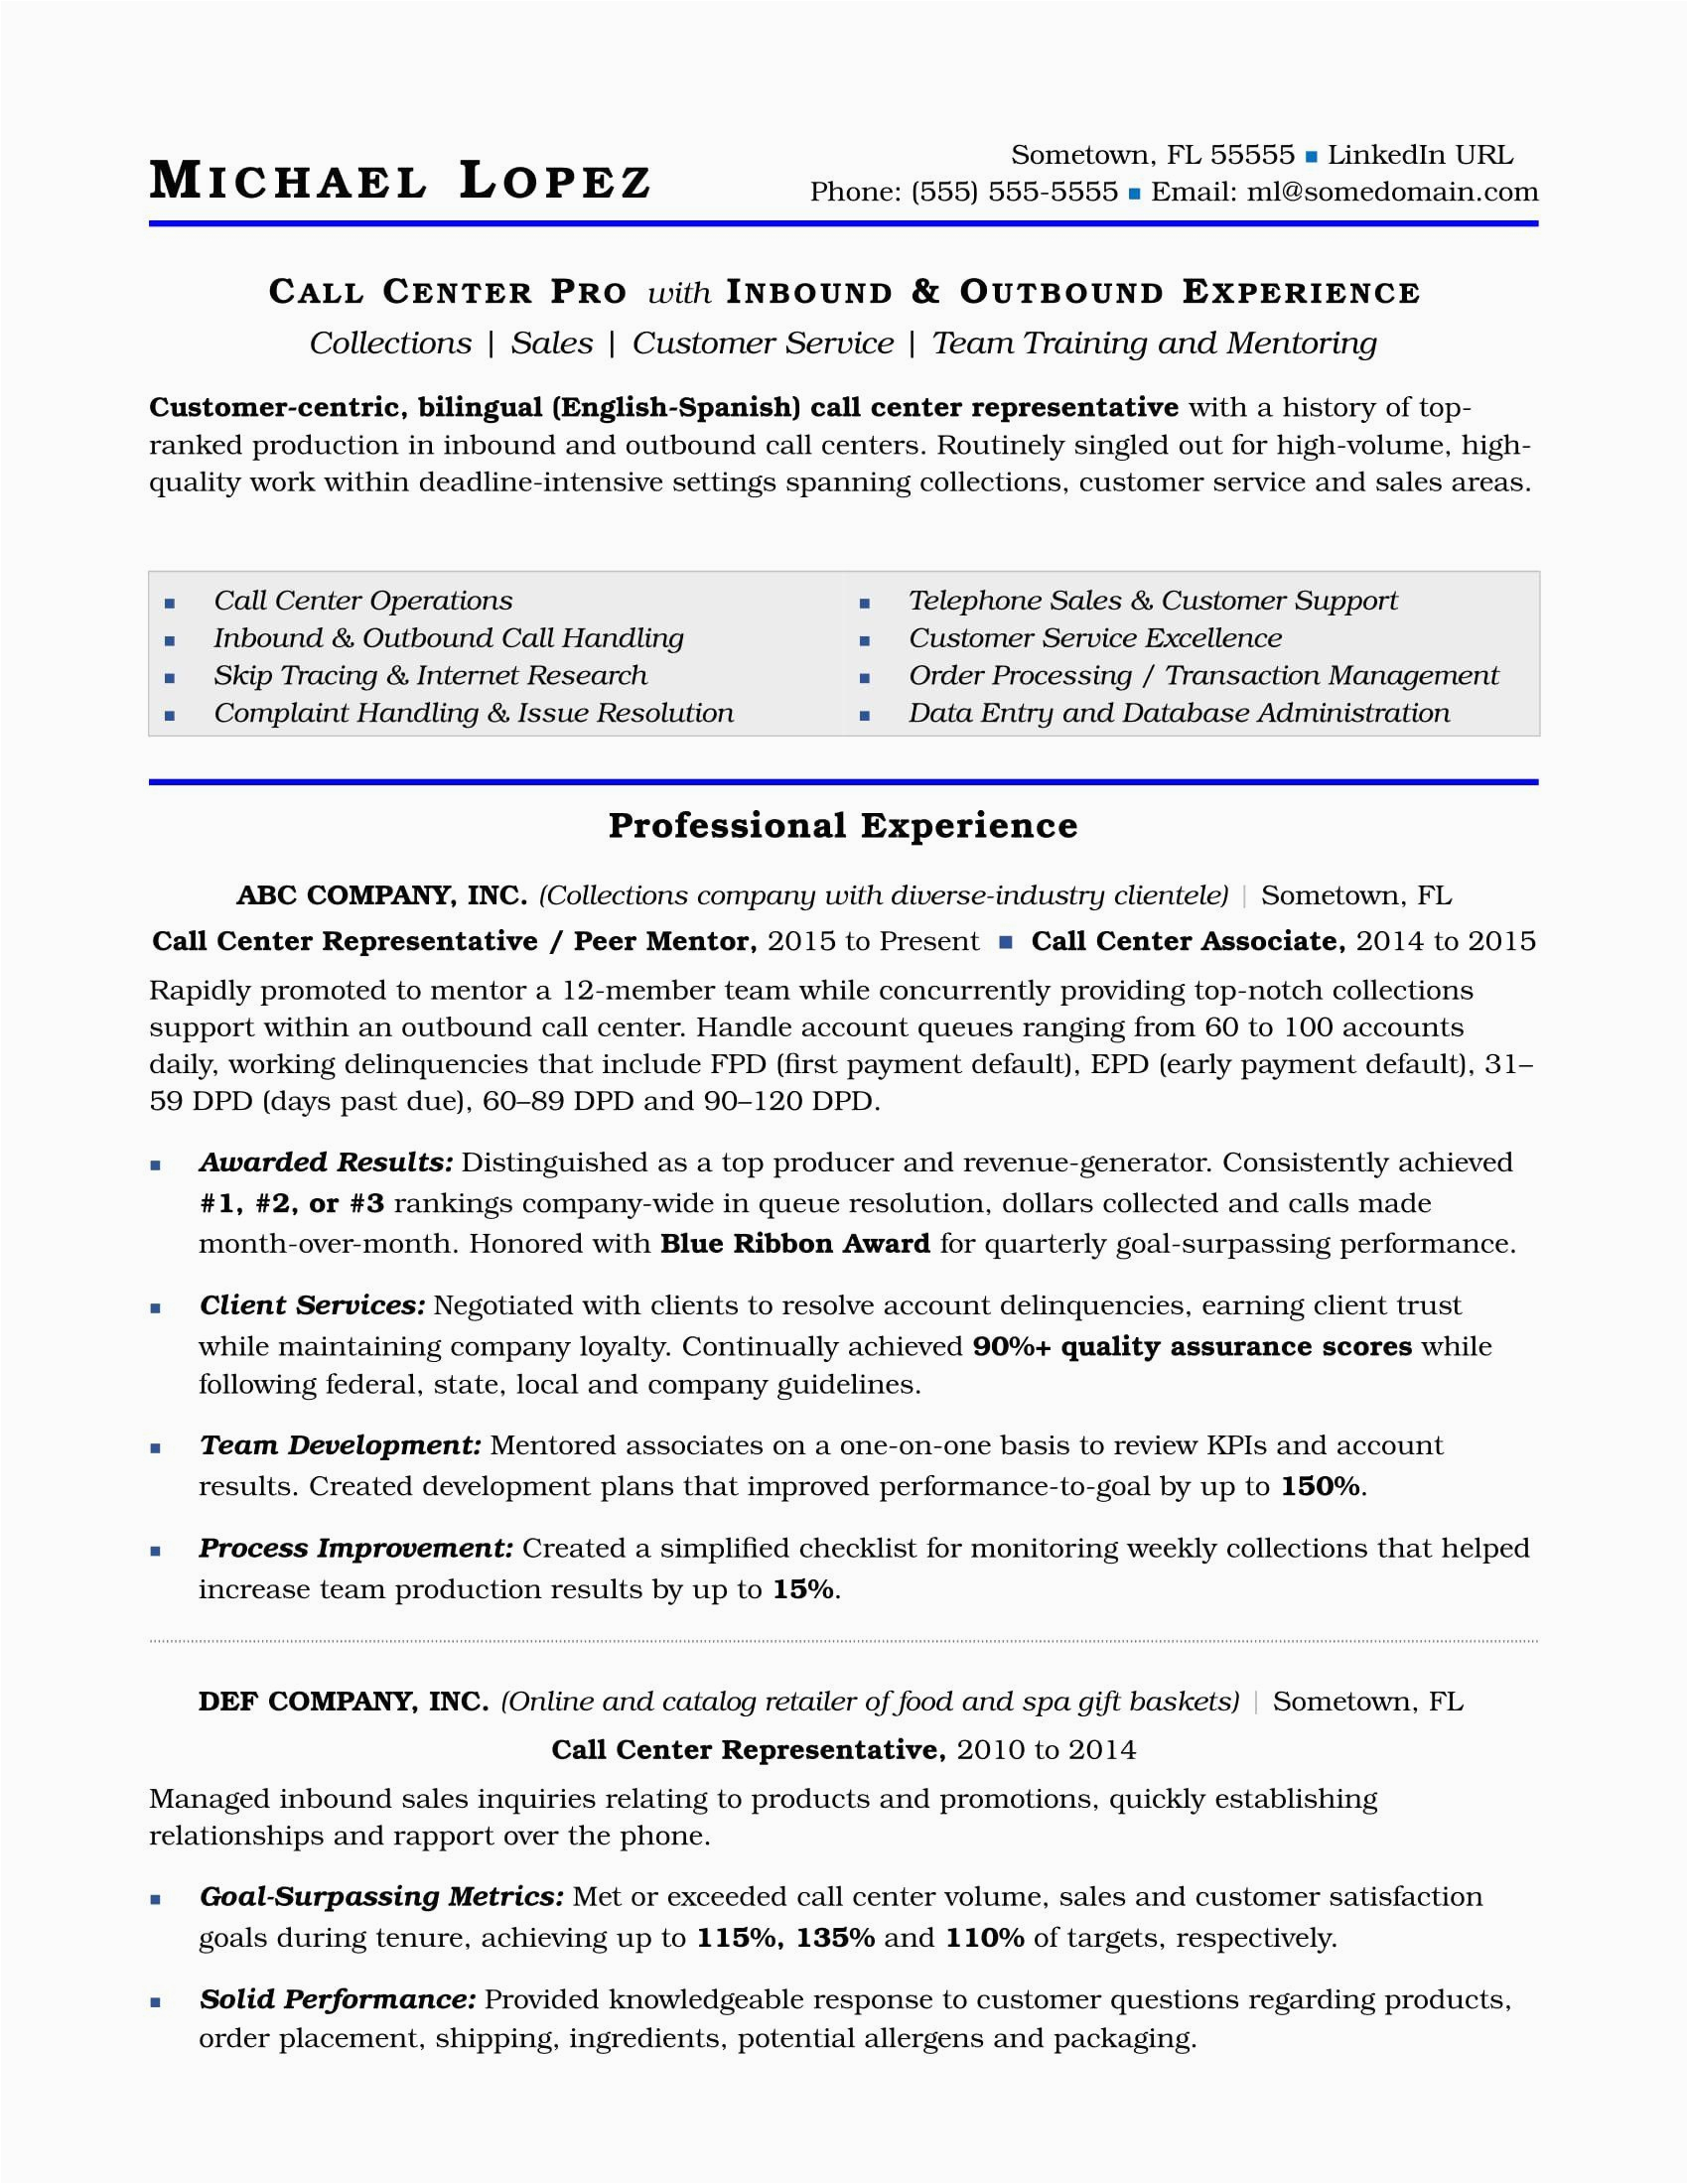 Sample Resume for Call Center Agent Applicant without Experience Call Center Resume Description Lovely Call Center Resume